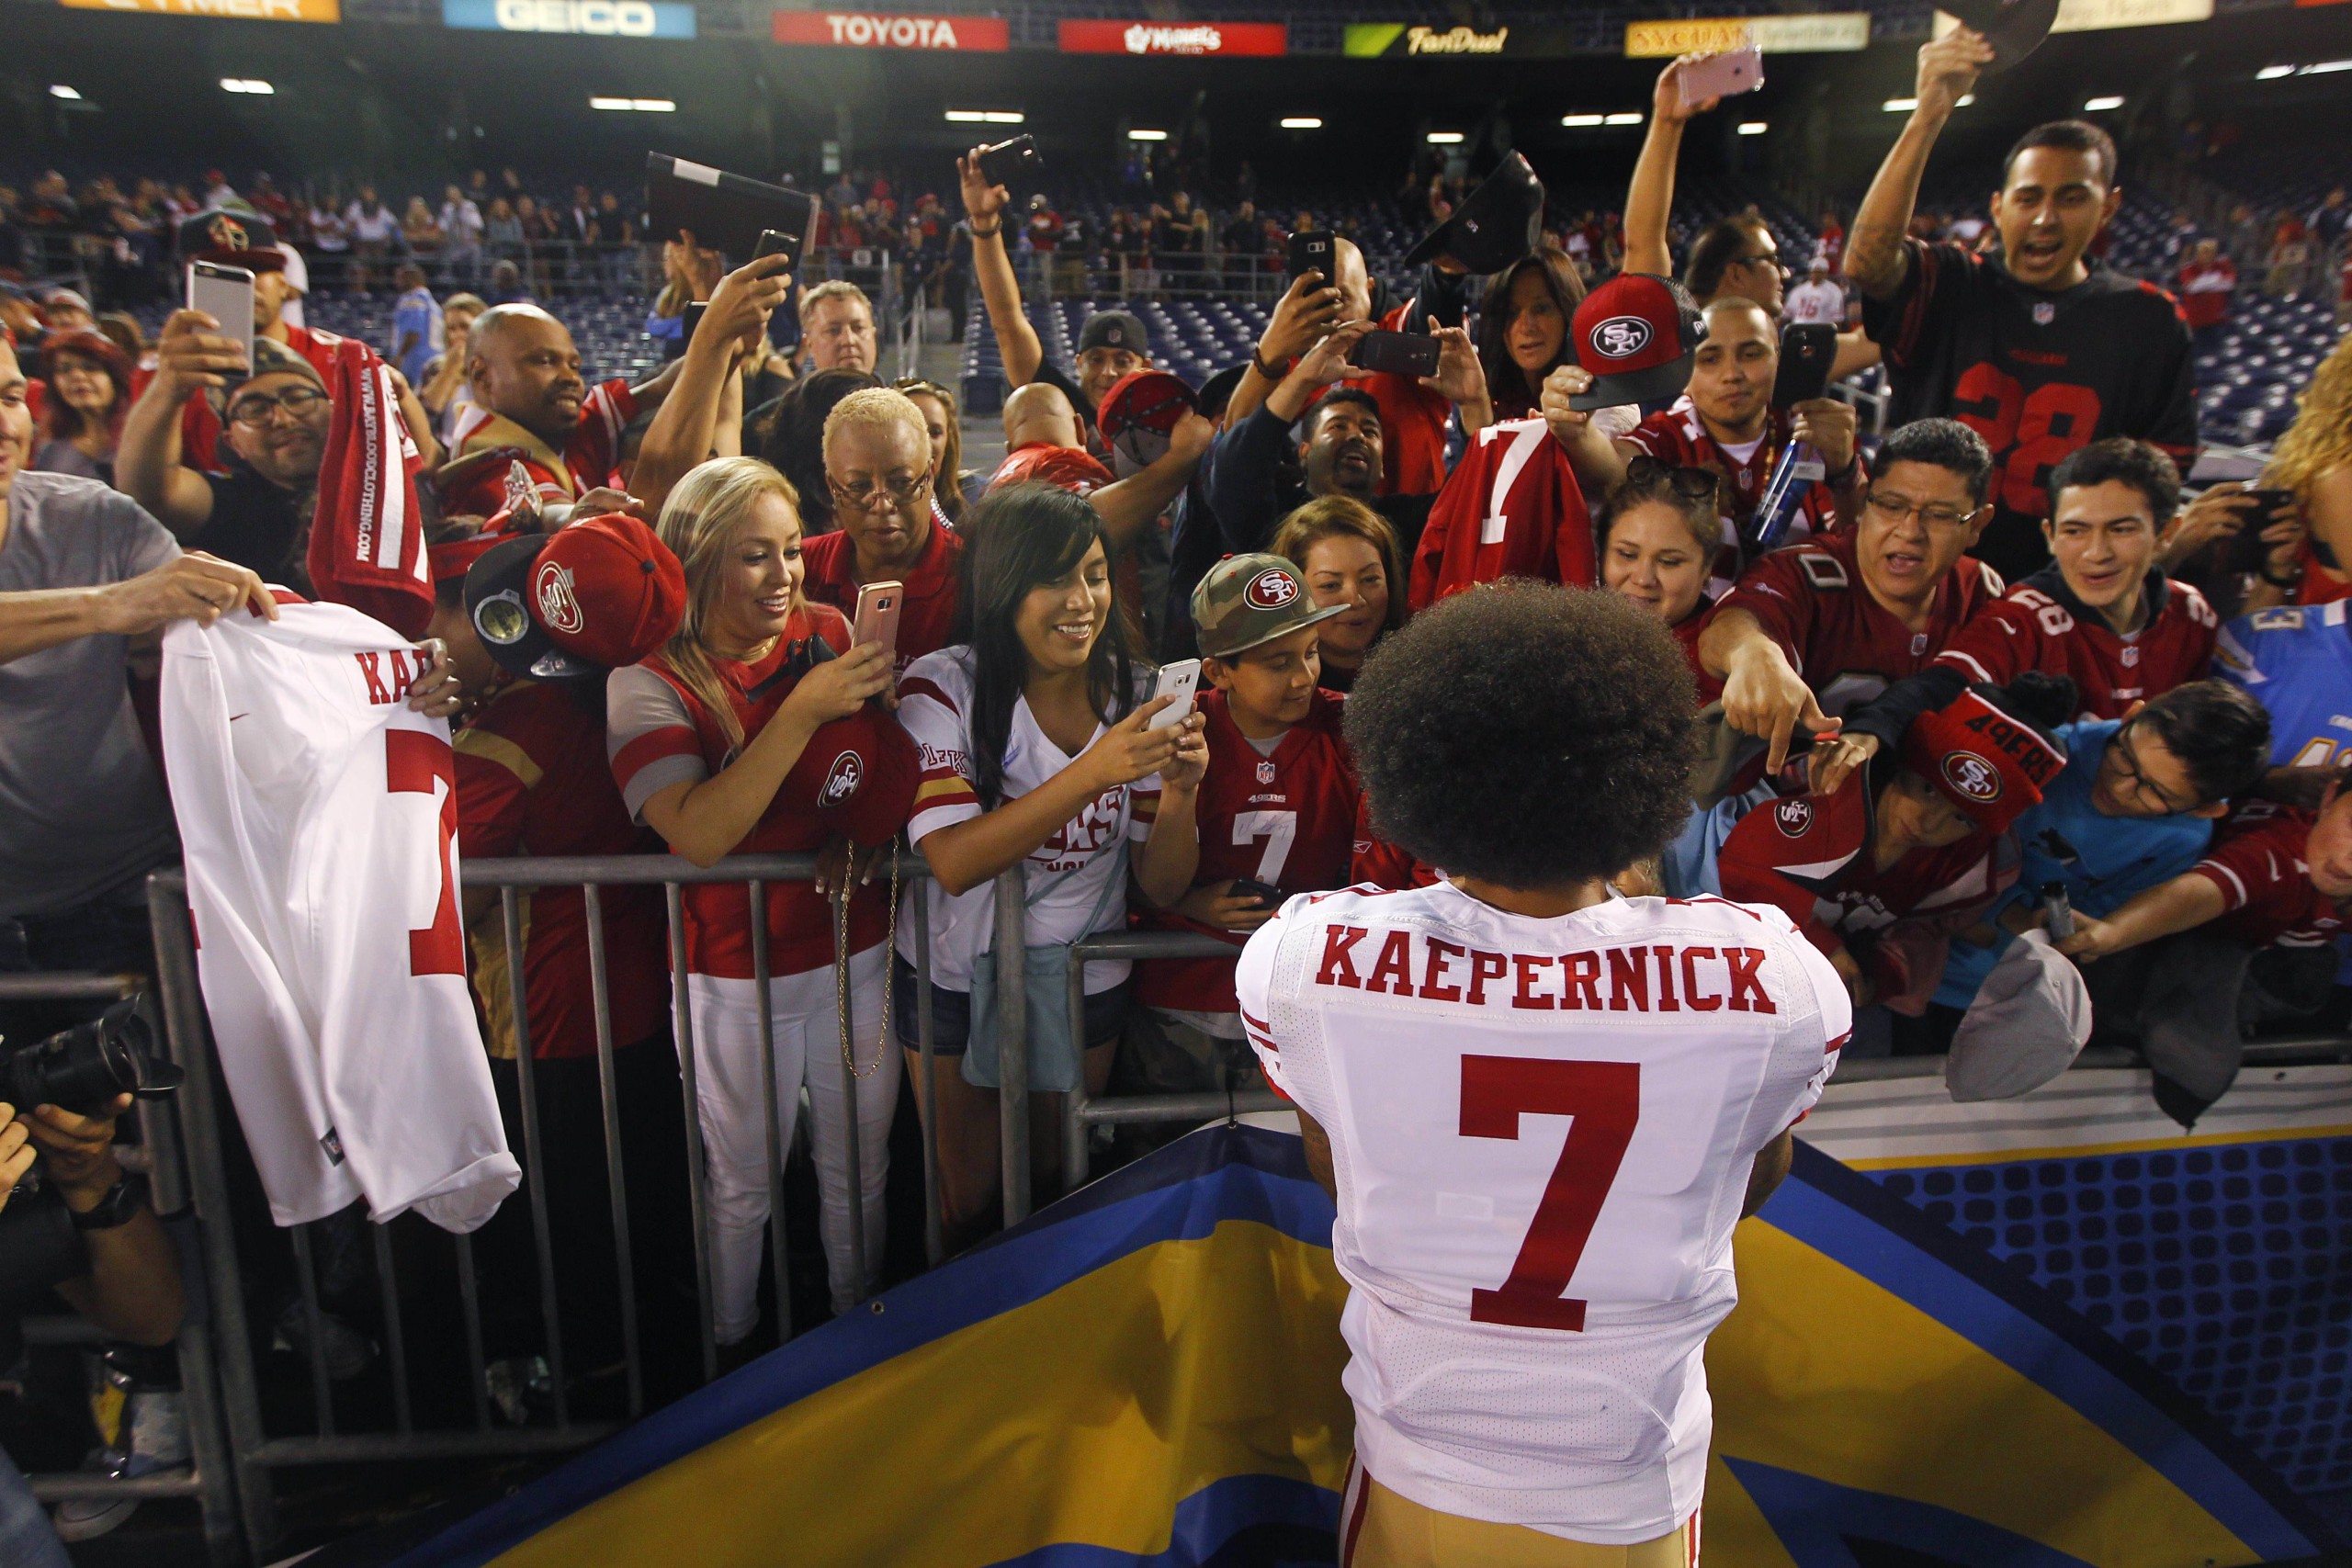 September 1, 2016 - San Diego, CA, USA - SAN DIEGO, CA - SEPTEMBER 1, 2016 - San Francisco 49ers quarterback Colin Kaepernick signs autographs for fans after a preseason game against the San Diego Chargers. Kaepernick kneeled during the national anthem before the game. San Francisco 49ers quarterback Colin Kaepernick takes photos with fans after a preseason game against the San Diego Chargers. Kaepernick kneeled during the national anthem before the game.  - ZUMAs44_